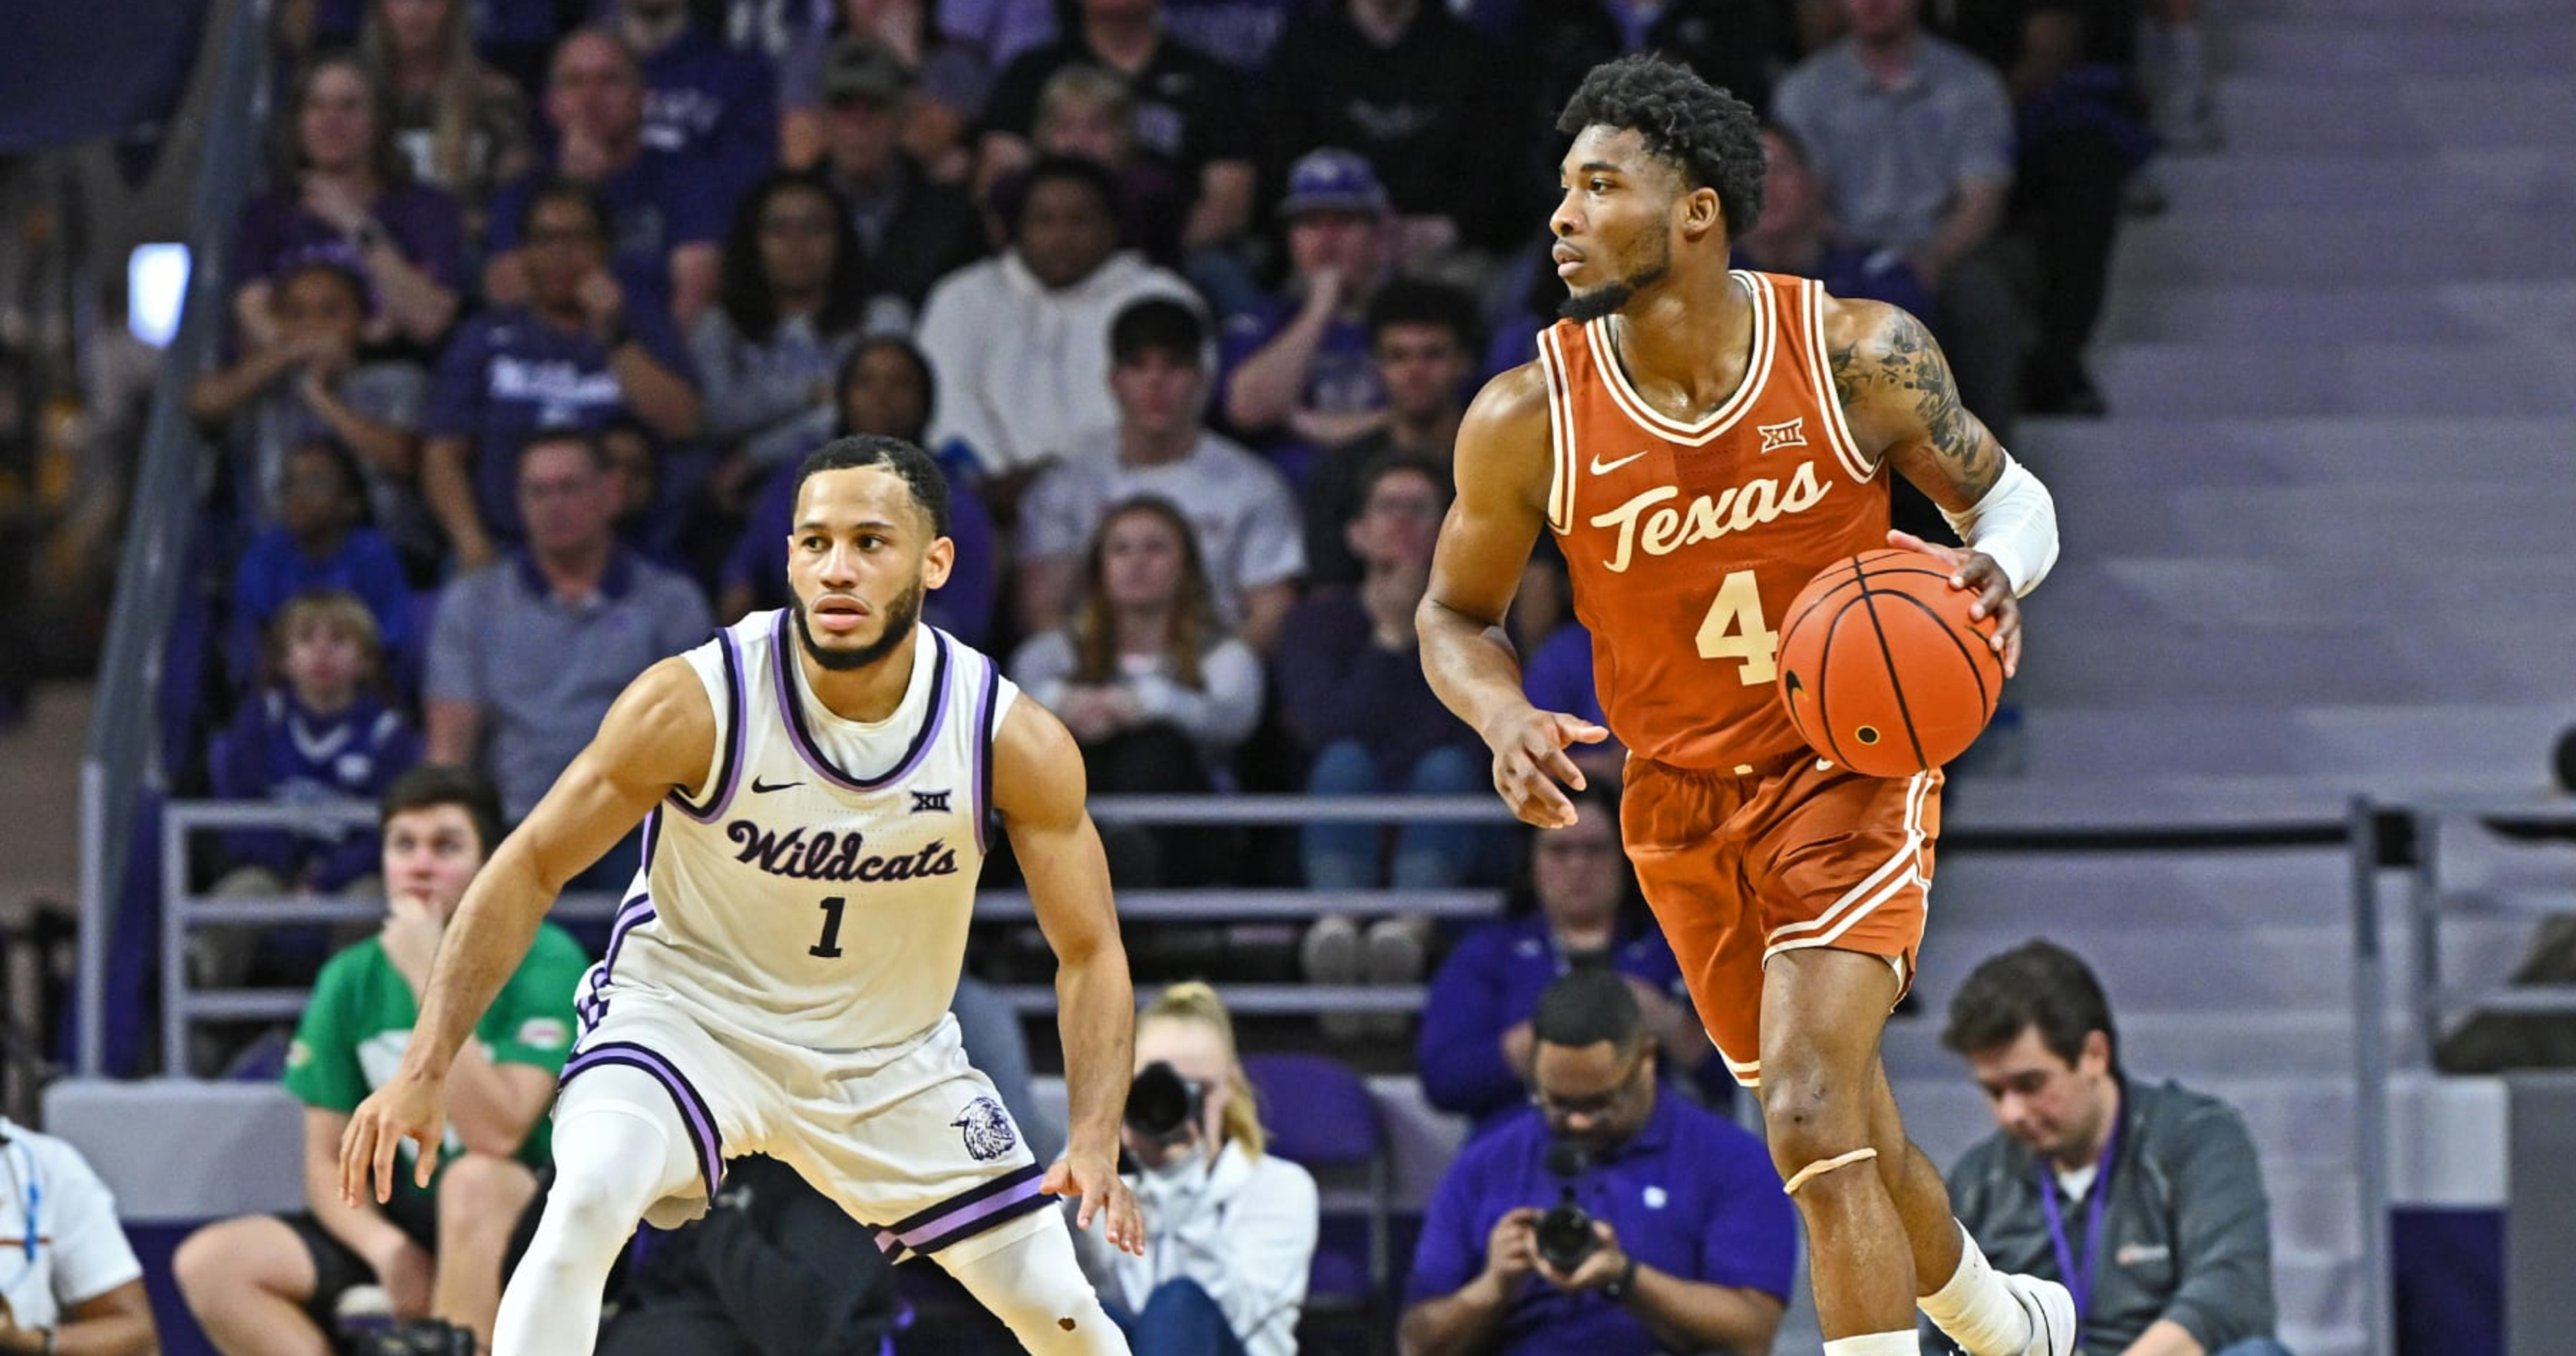 NCAA March Madness on X: NO. 12 WILDCATS WIN BIG OVER NO. 17 TCU